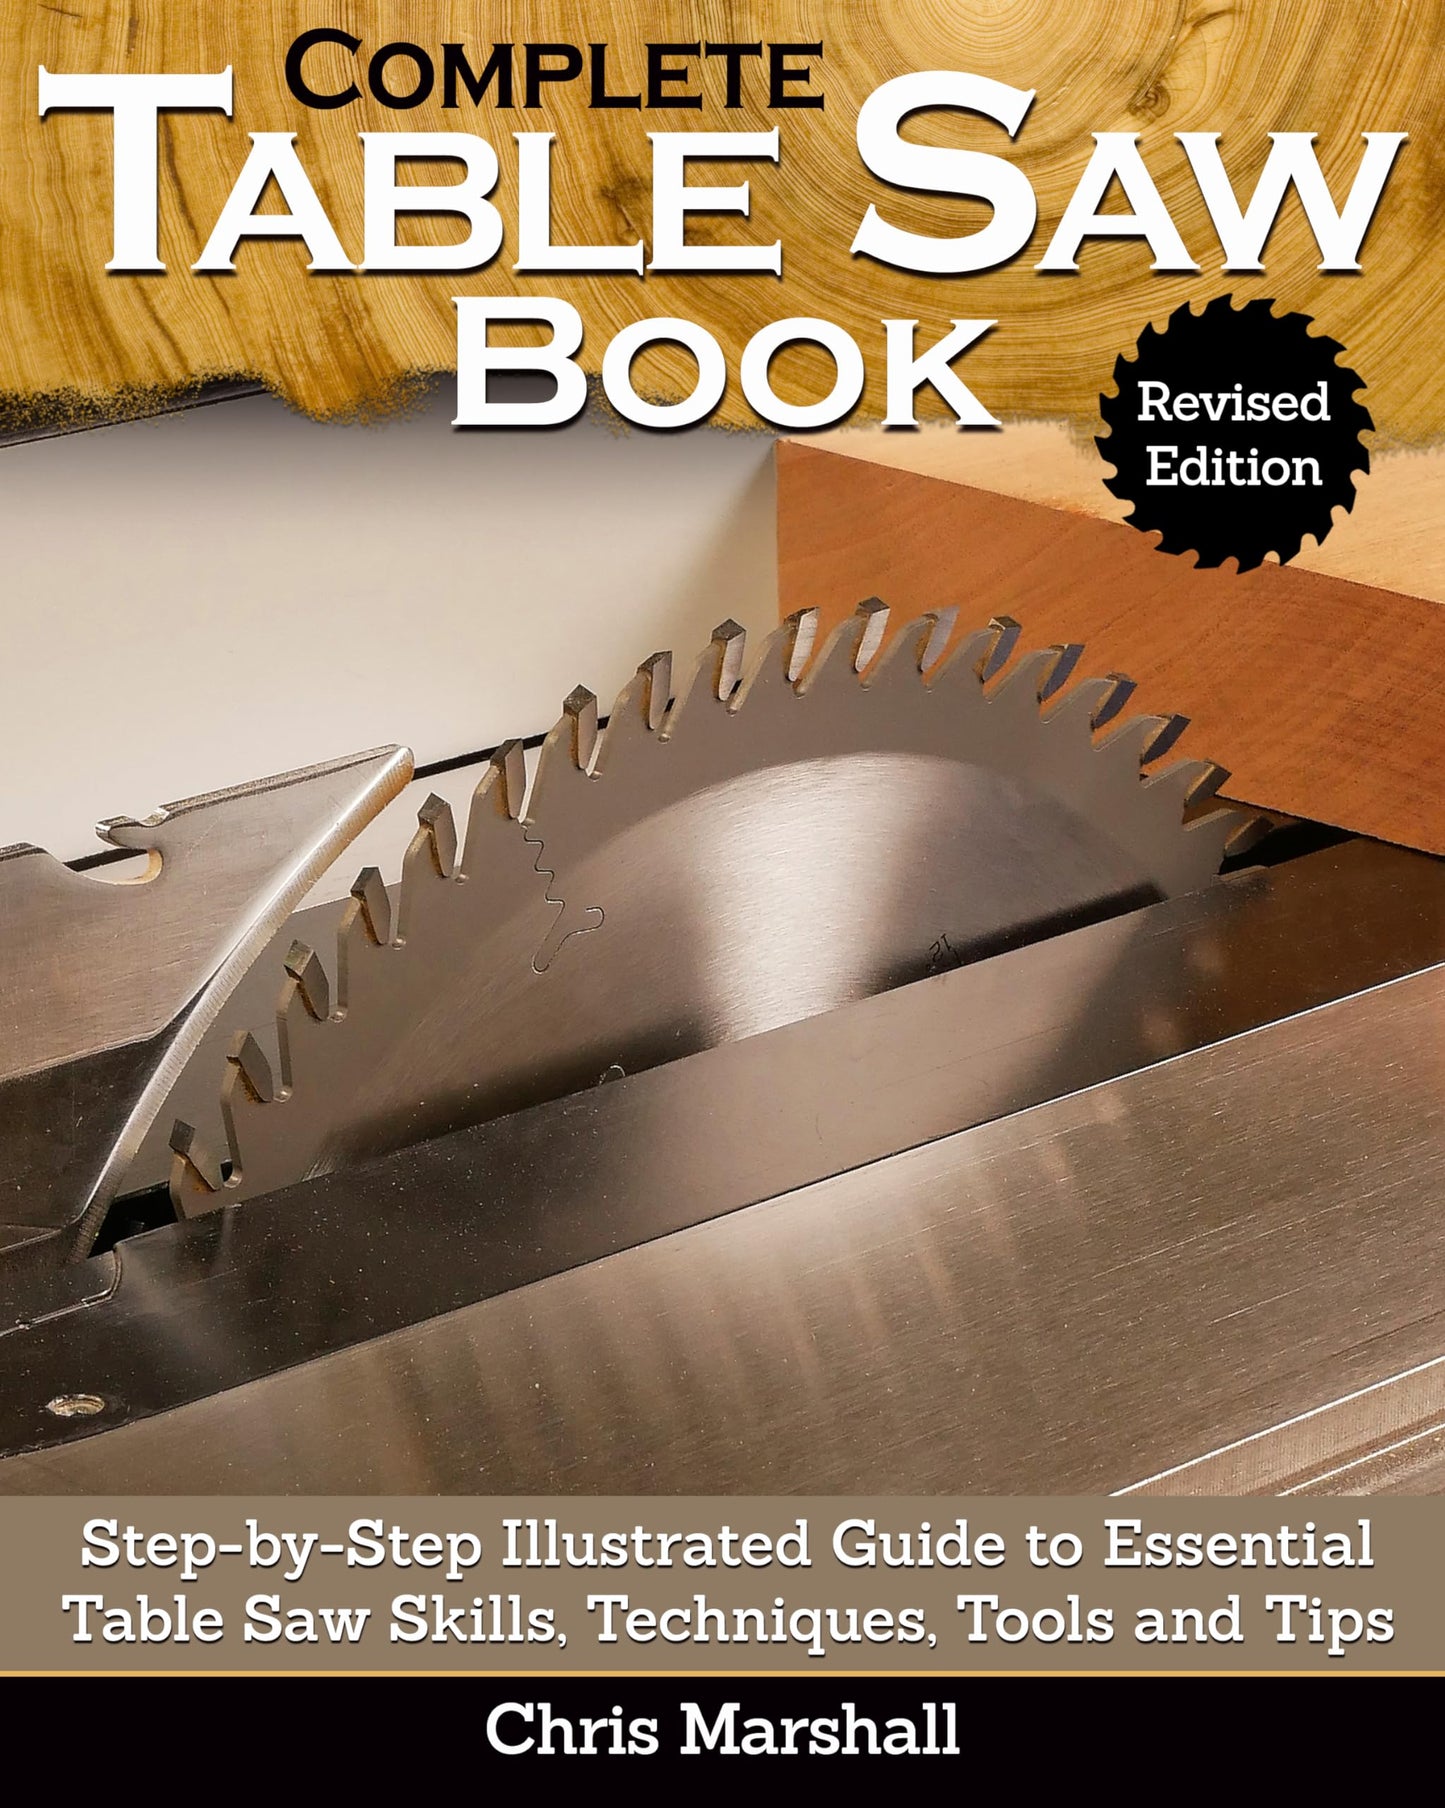 Complete Table Saw Book, Revised Edition: Step-by-Step Illustrated Guide to Essential Table Saw Skills, Techniques, Tools, and Tips (Fox Chapel